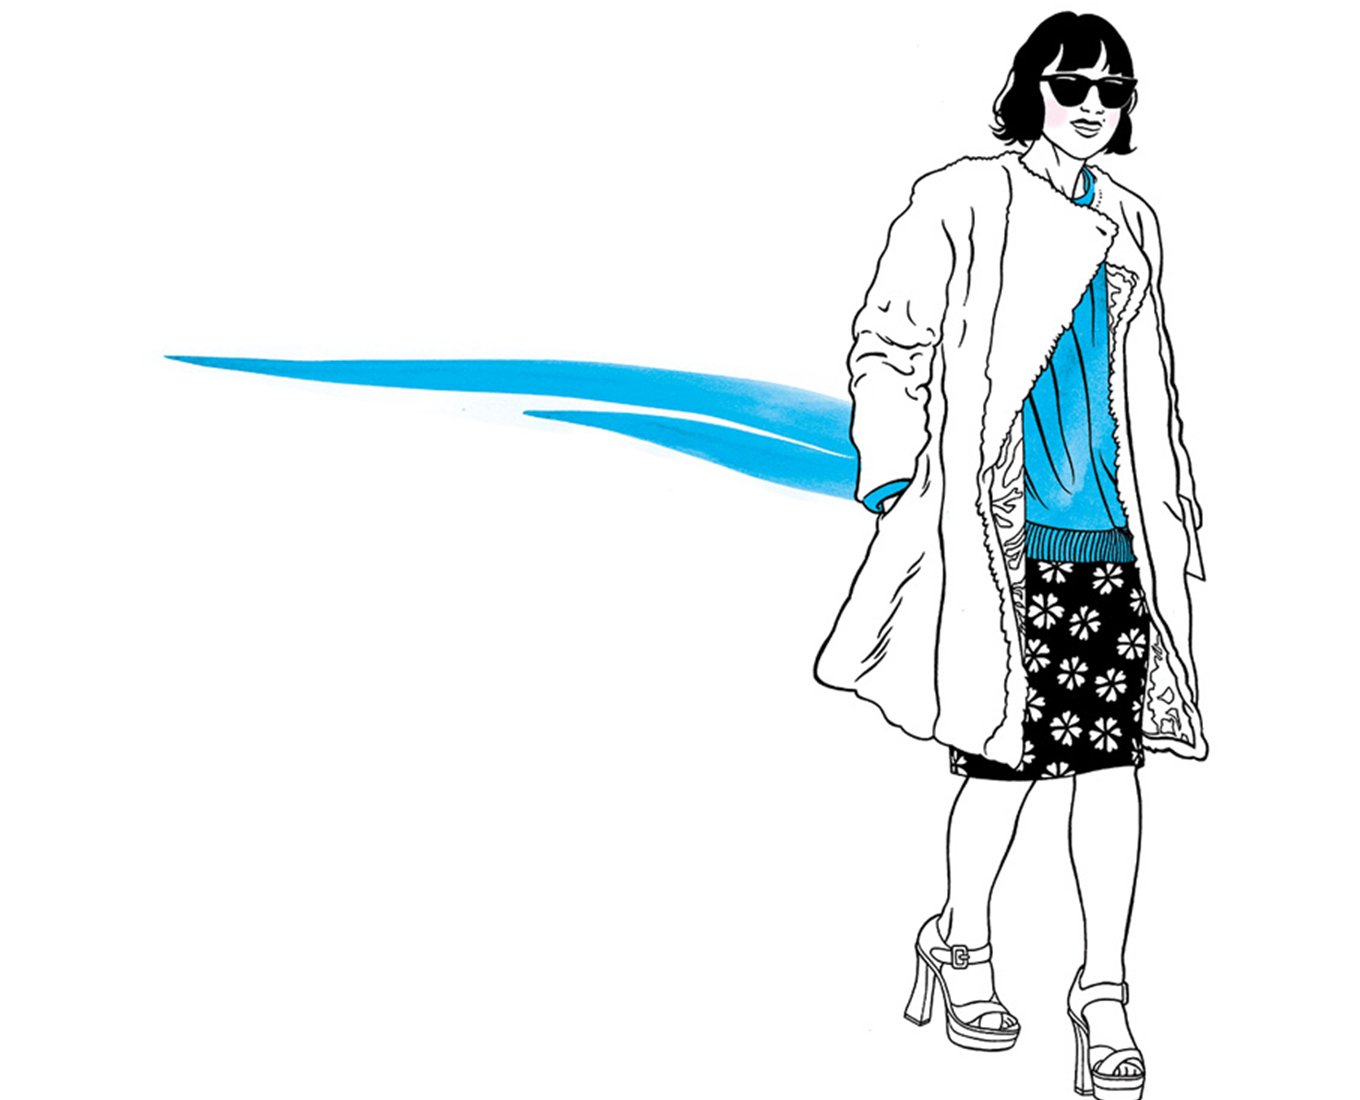 A drawing of a woman wearing a skirt, long jacket, and sunglasses.